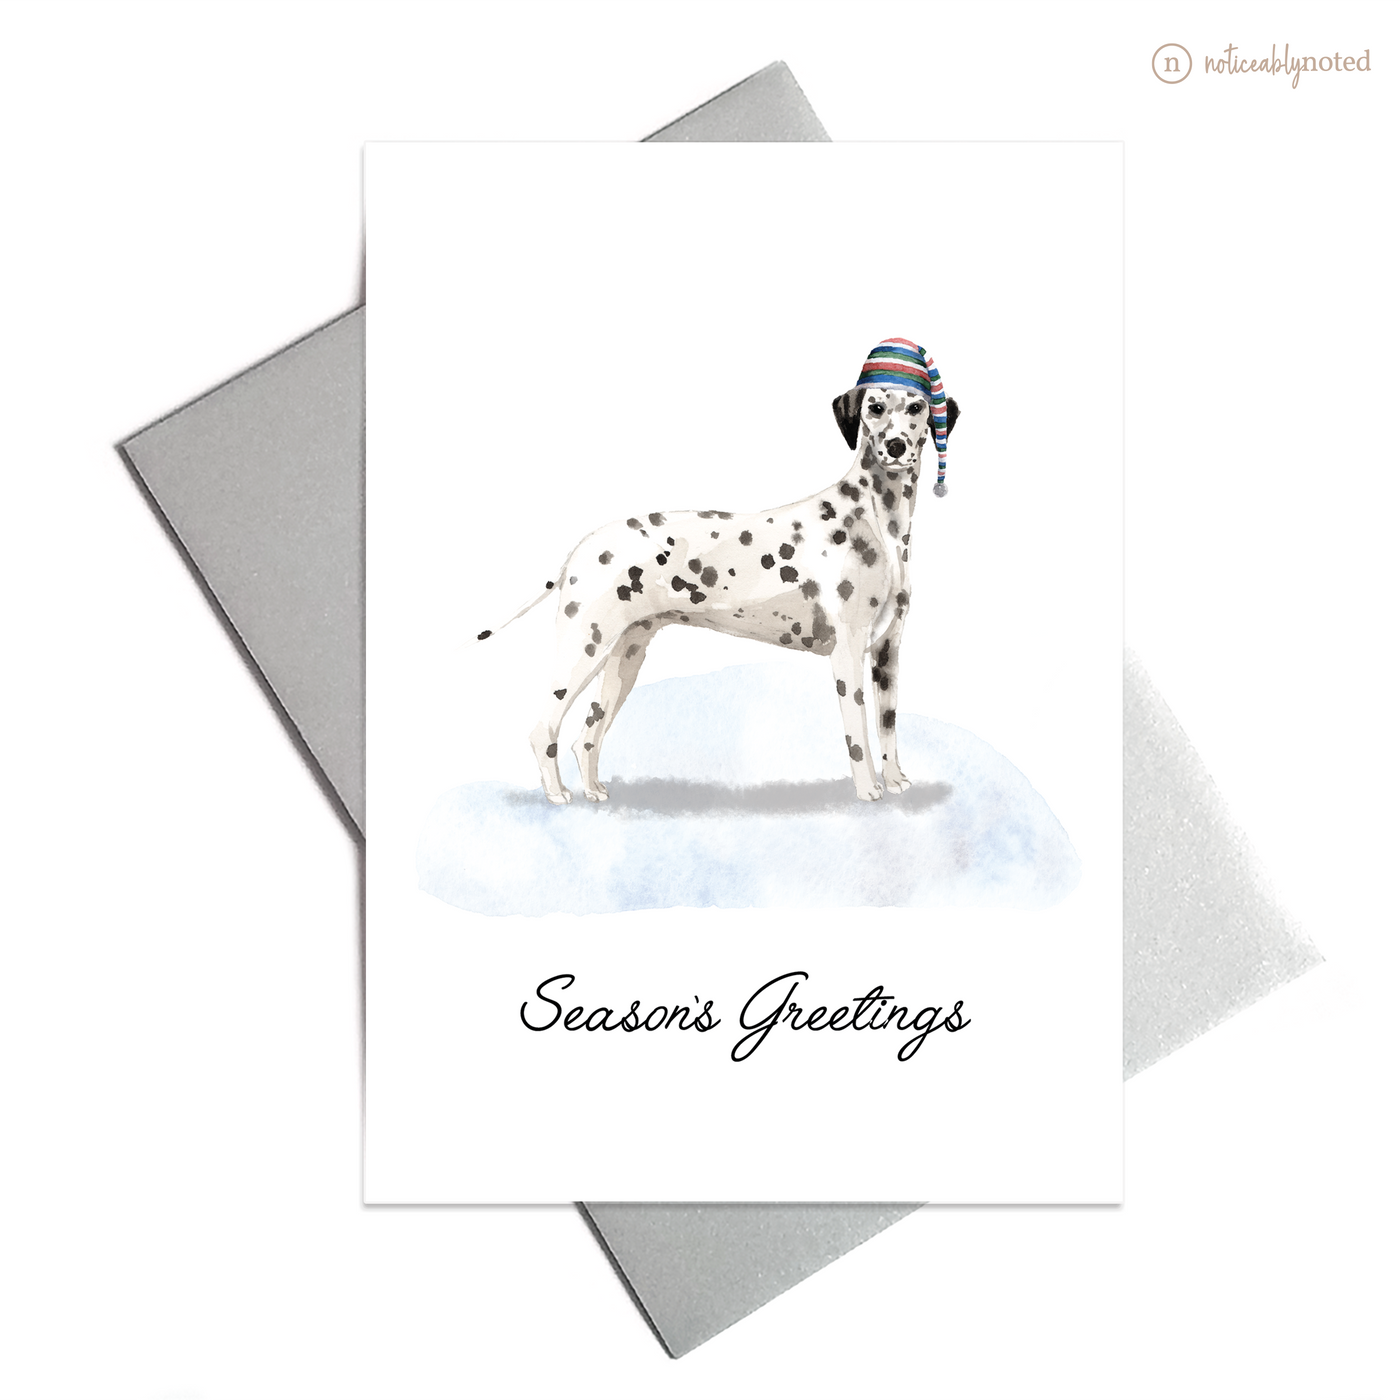 Dalmatian Dog Holiday Card | Noticeably Noted